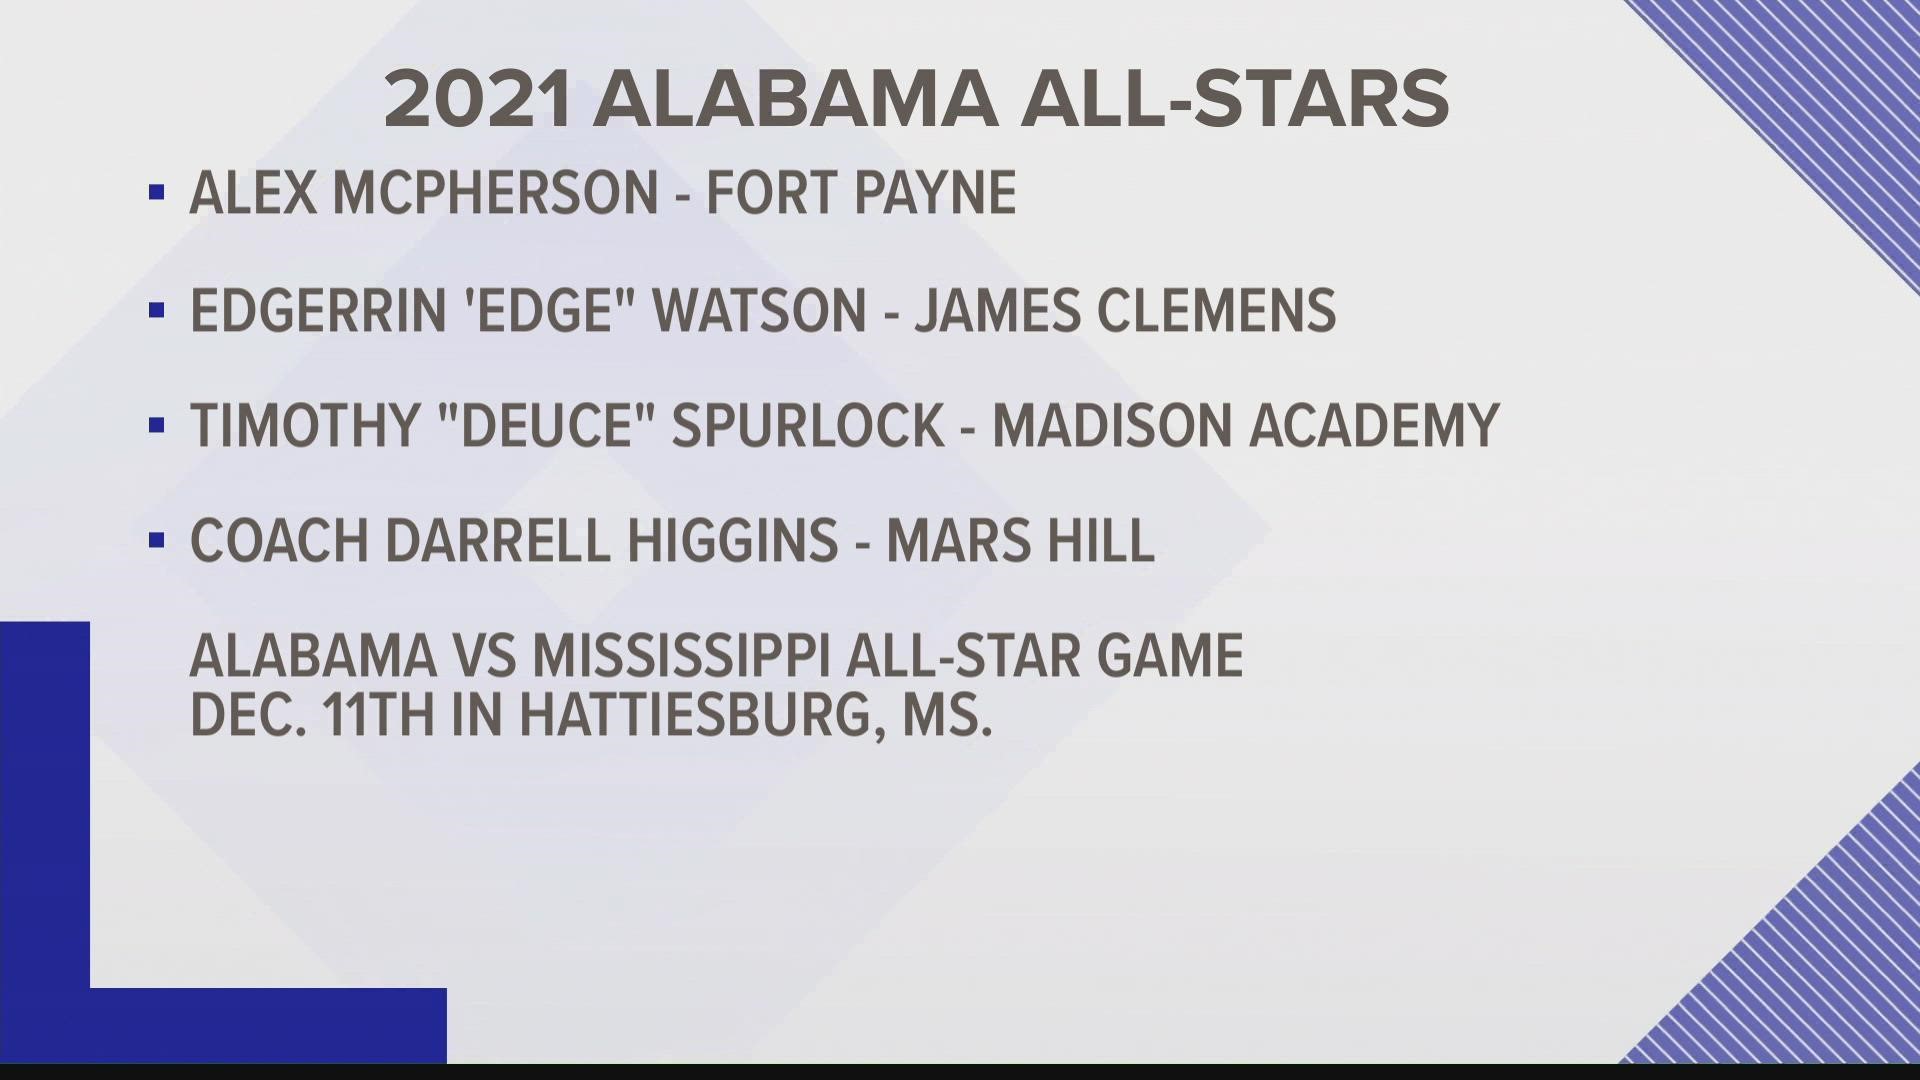 Alex McPherson, Edge Watson and Deuce Spurlock were selected for this year's Alabama - Mississippi All-Star game.